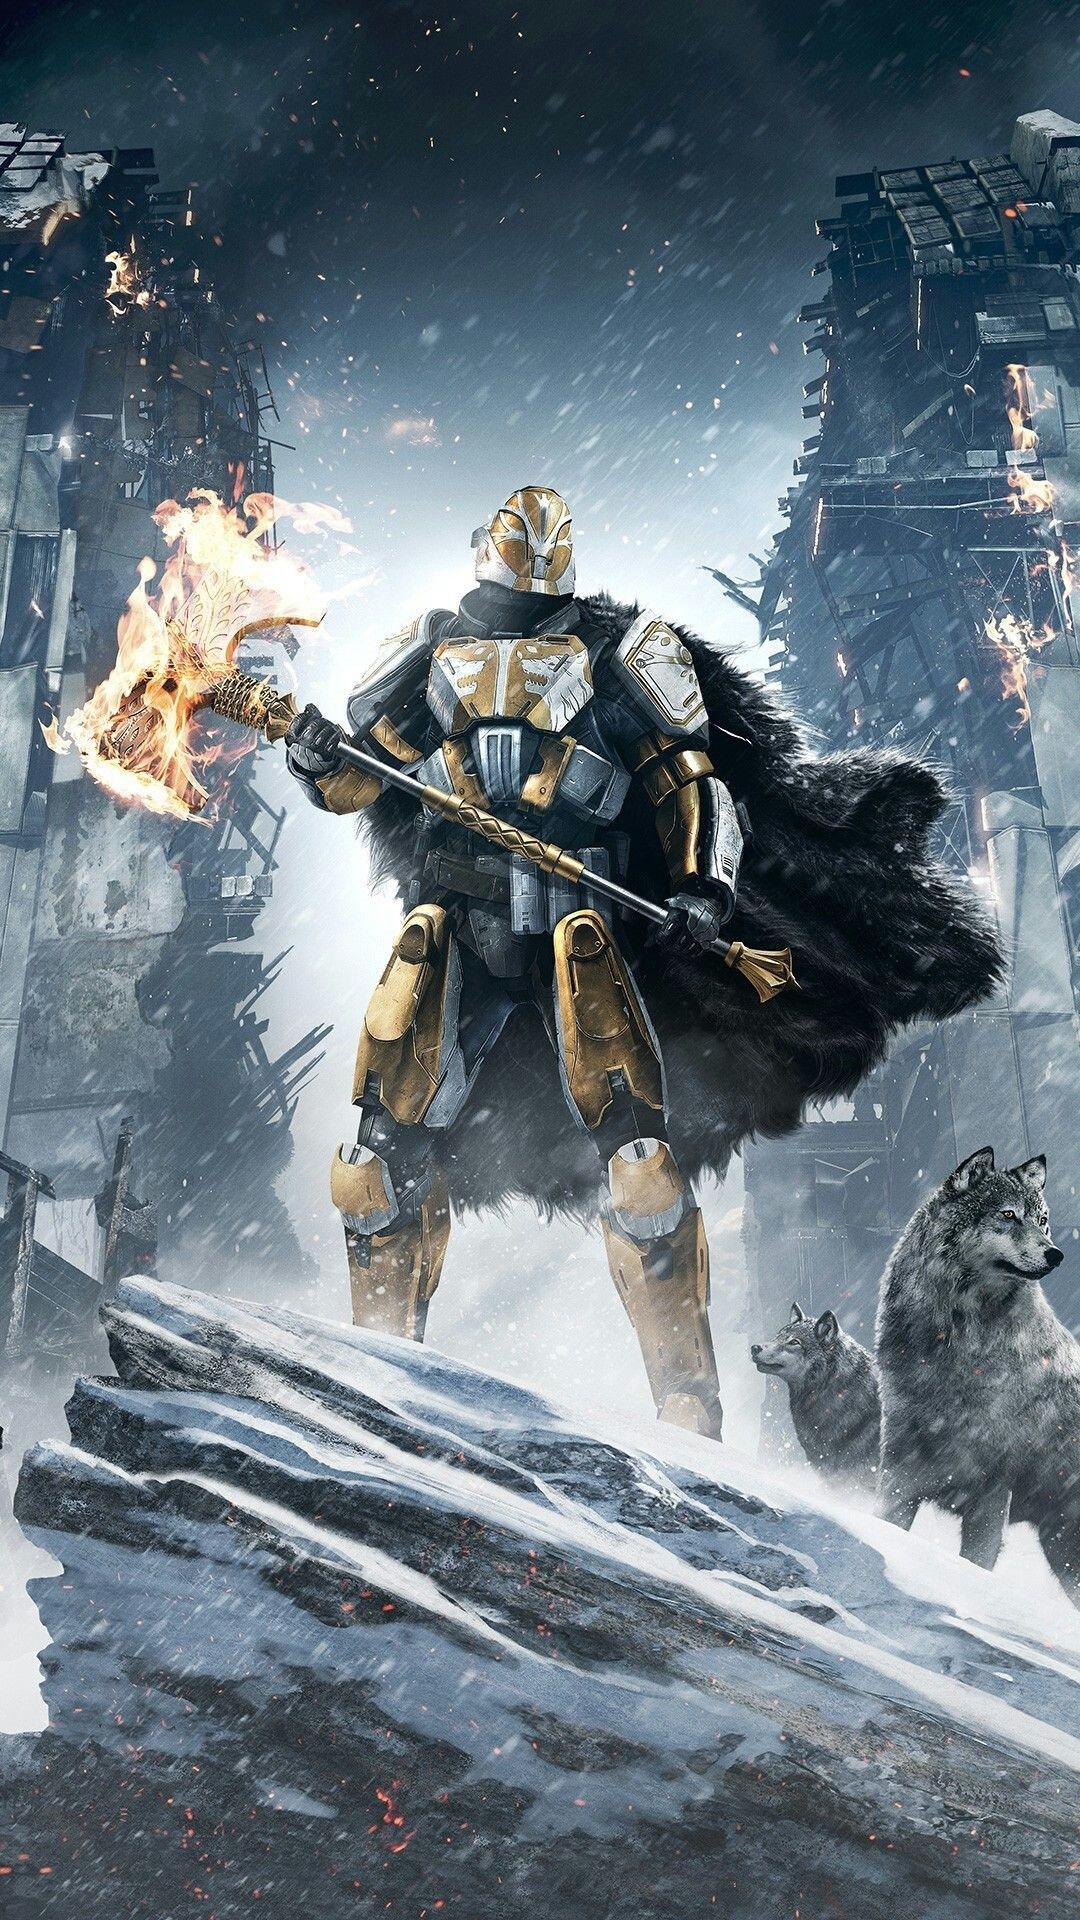 Destiny Iphone Wallpaper - KoLPaPer - Awesome Free HD Wallpapers